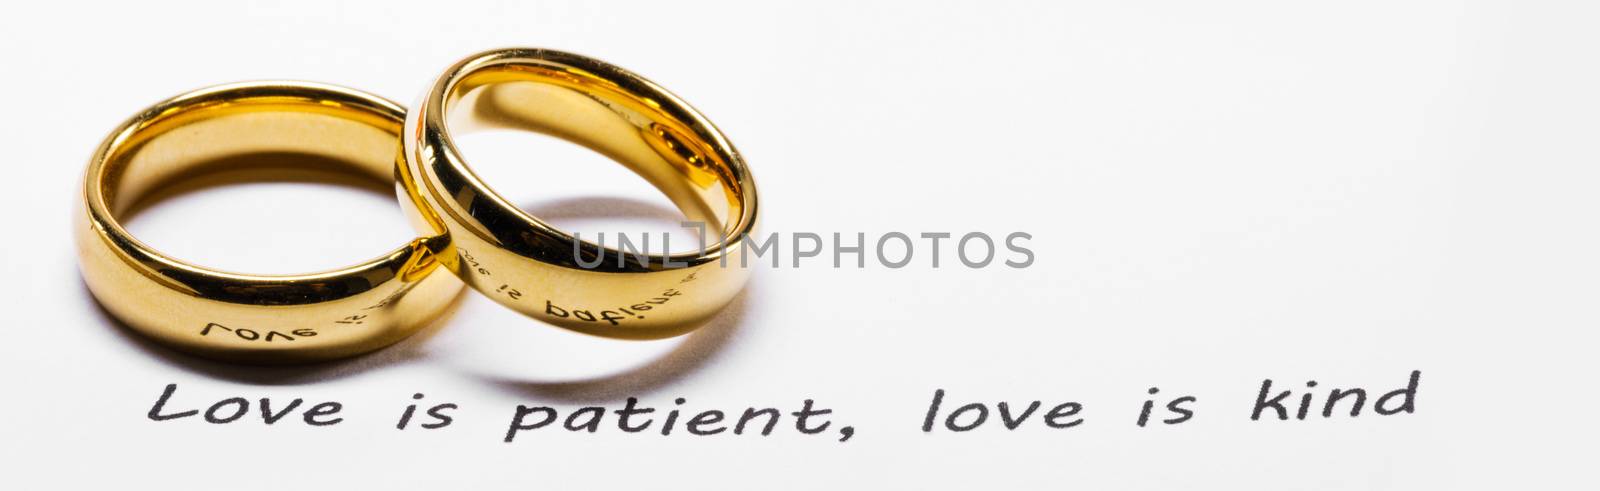 Two golden wedding rings on Holy bible book phrase close up, love is patient, love is kind